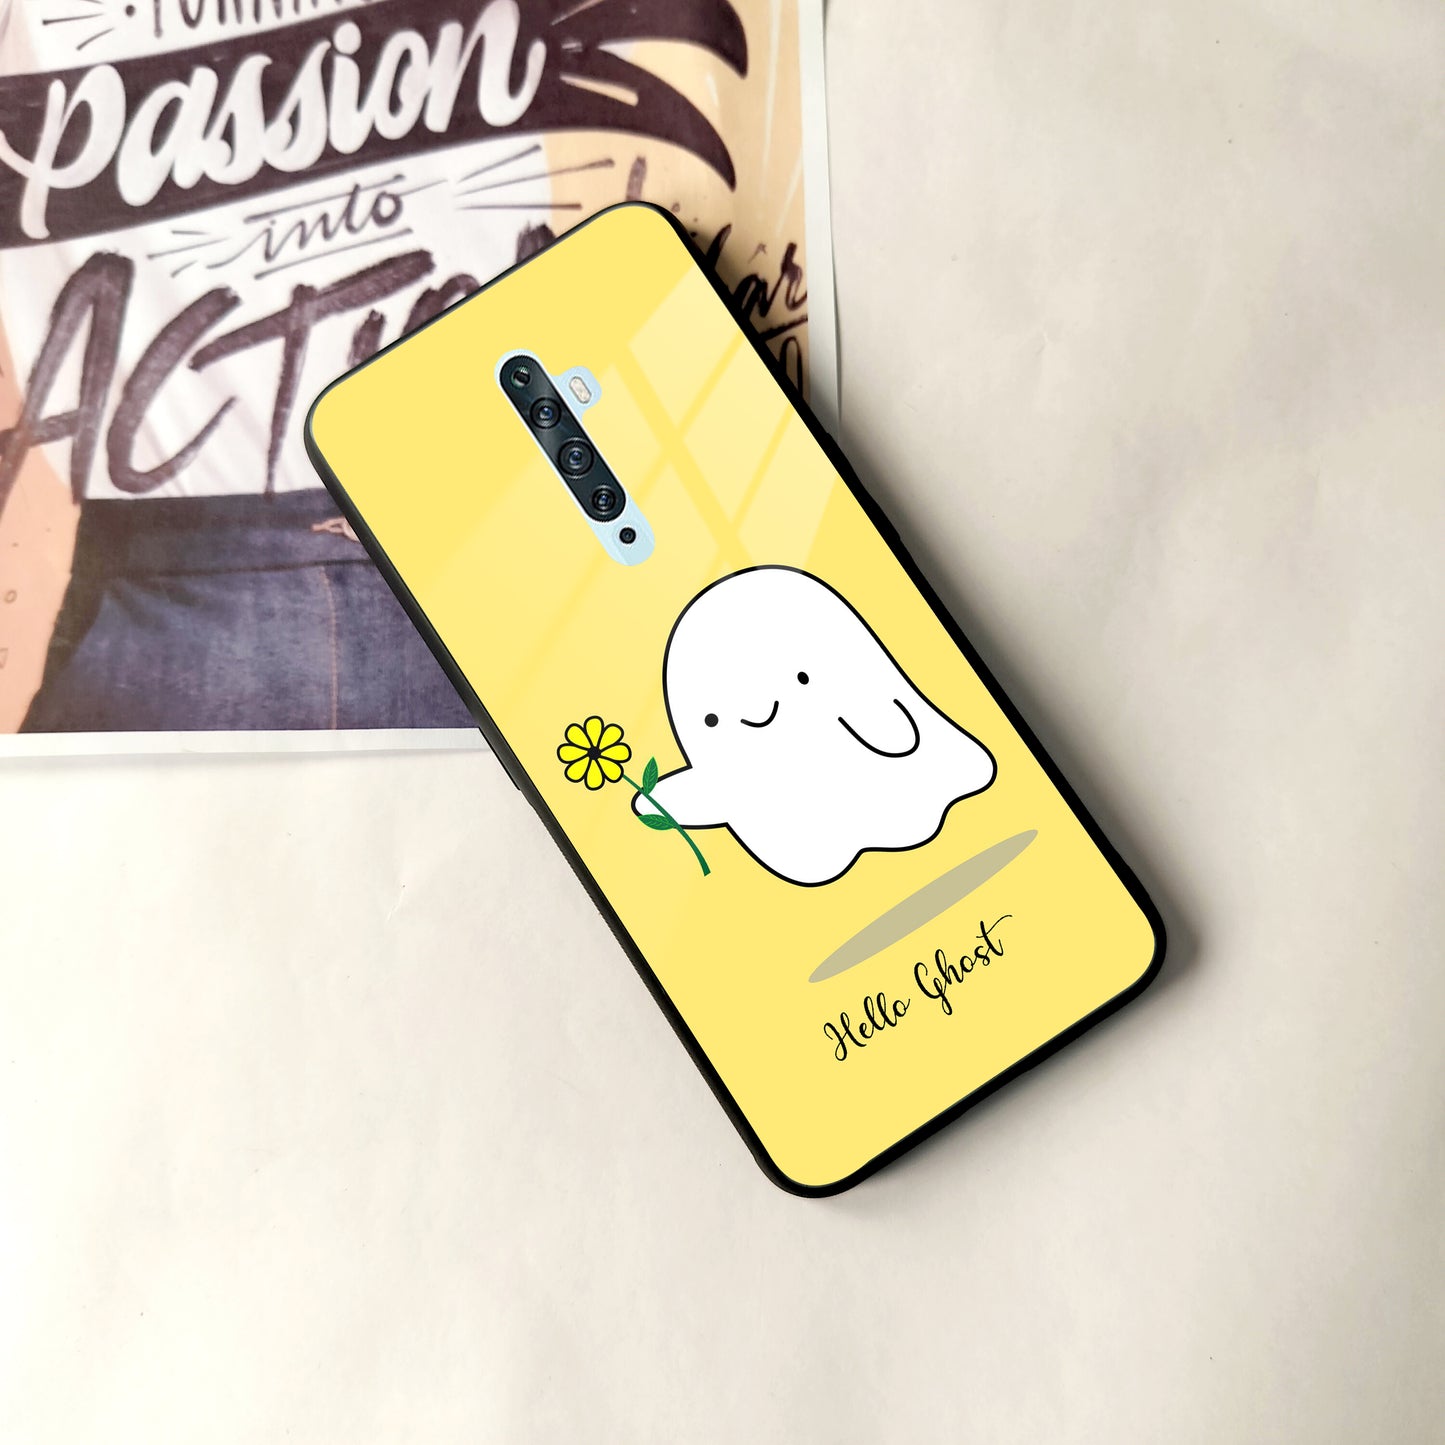 Ghost With Flower Glass Case Cover For Oppo